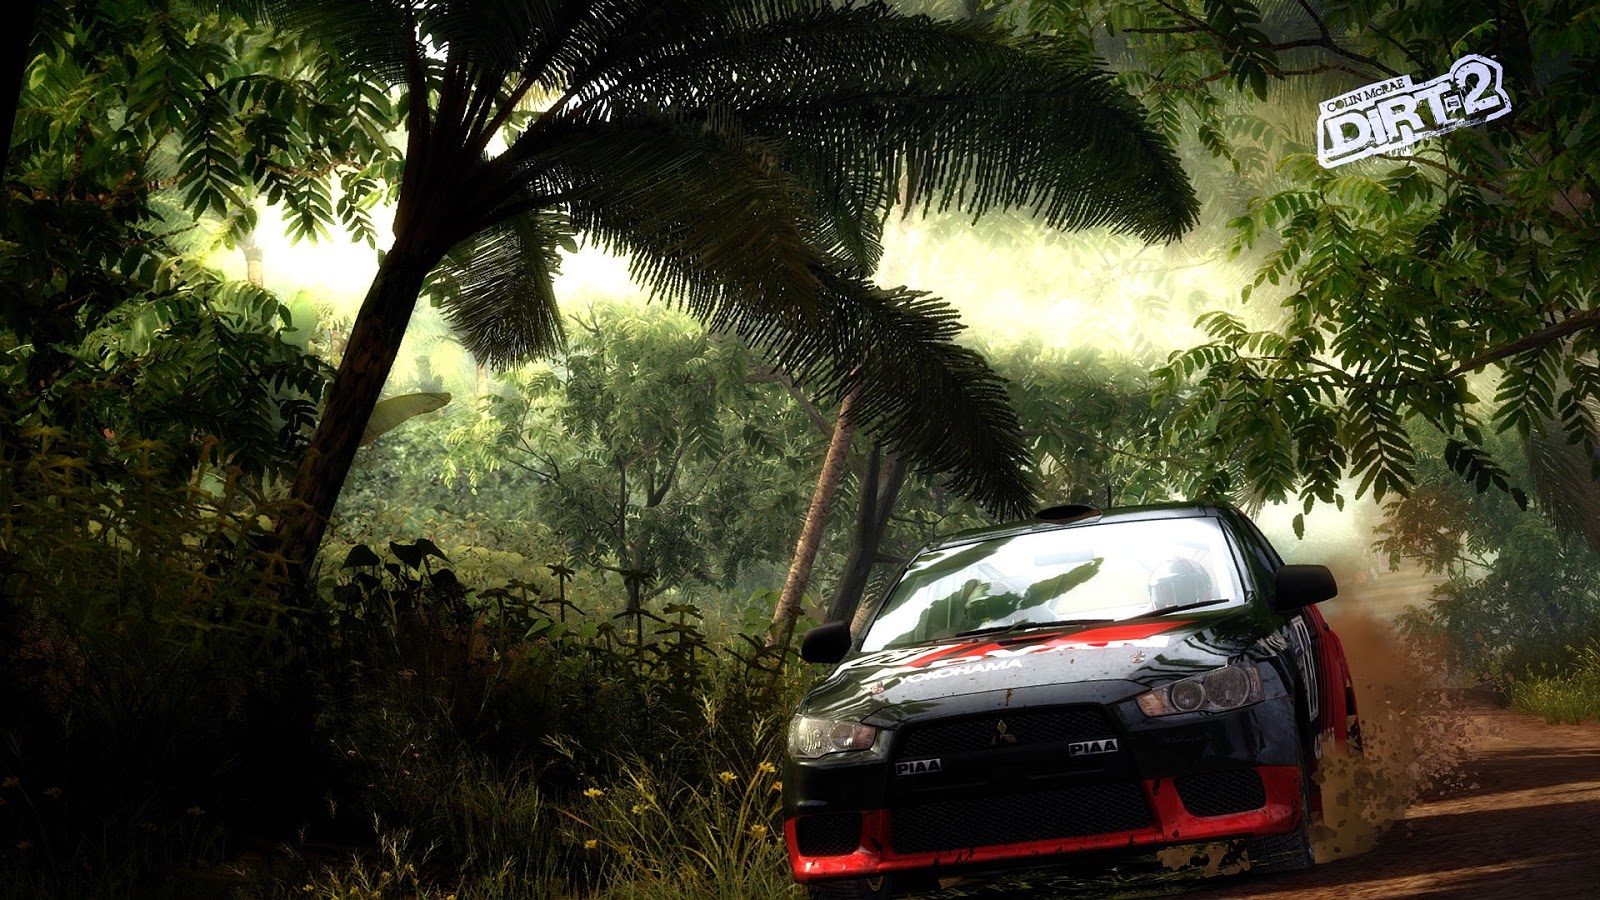 HD WALLPAPERS MANIA Dirt 2 HD Wallpapers 1600x900